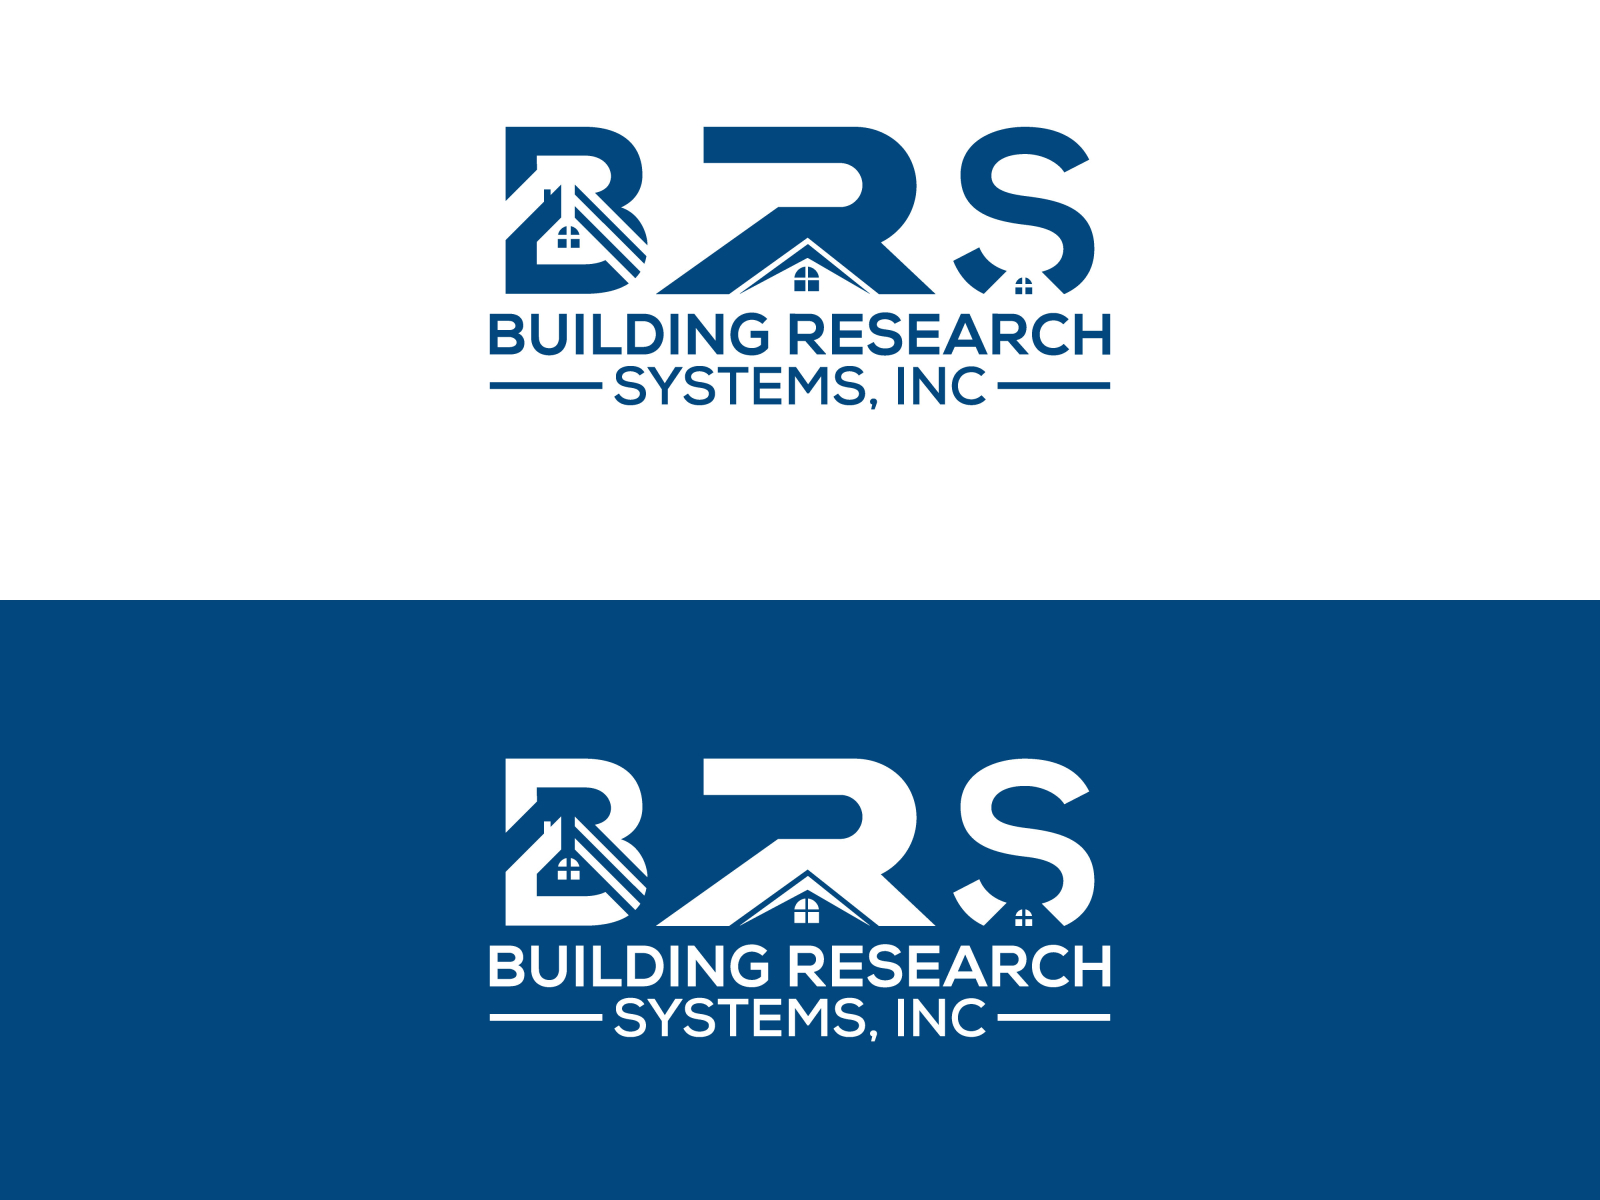 Brs letter logo creative design with graphic Vector Image